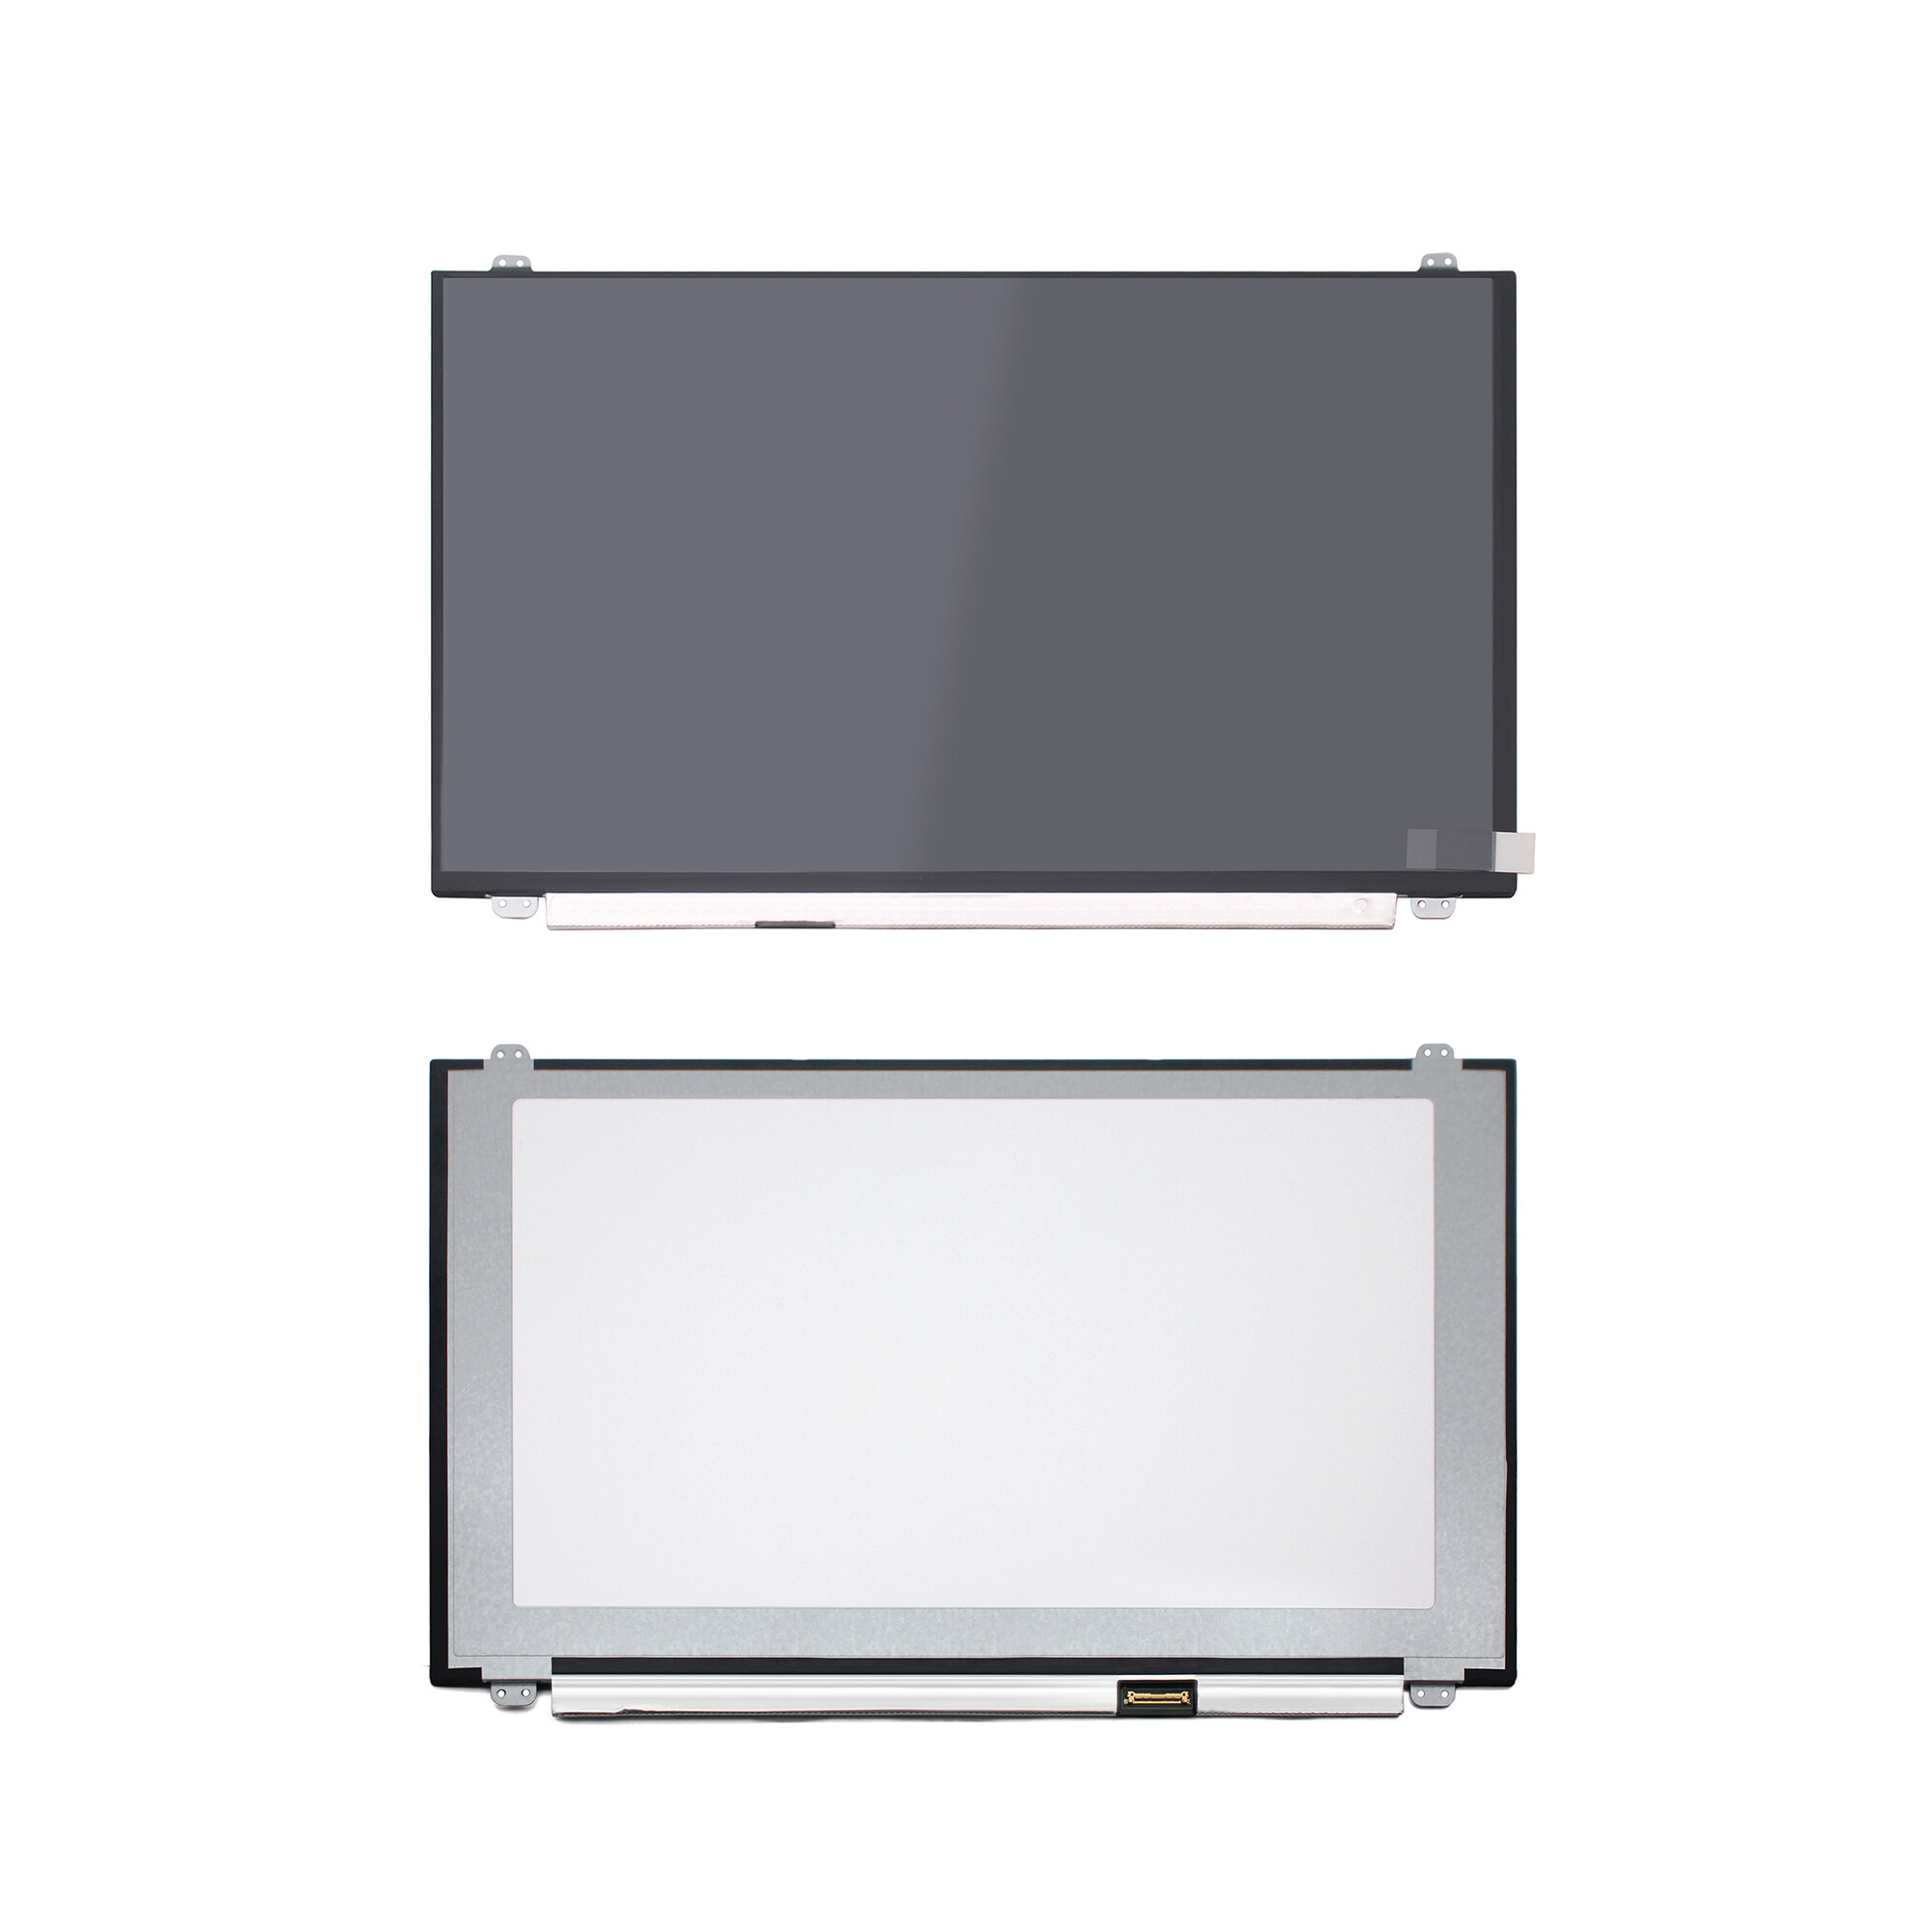 Kreplacement LCD Screen Display LED IPS Panel Matrix 120HZ N156HCE-GA2 N156HHE-GA1 For MSI GE60 GE63 GT62 GS63VR 7RG-078US Laptop Kreplacement LCD Screen Display LED IPS Panel Matrix 120HZ N156HCE-GA2 N156HHE-GA1 For MSI GE60 GE63 GT62 GS63VR 7RG-078US Laptop